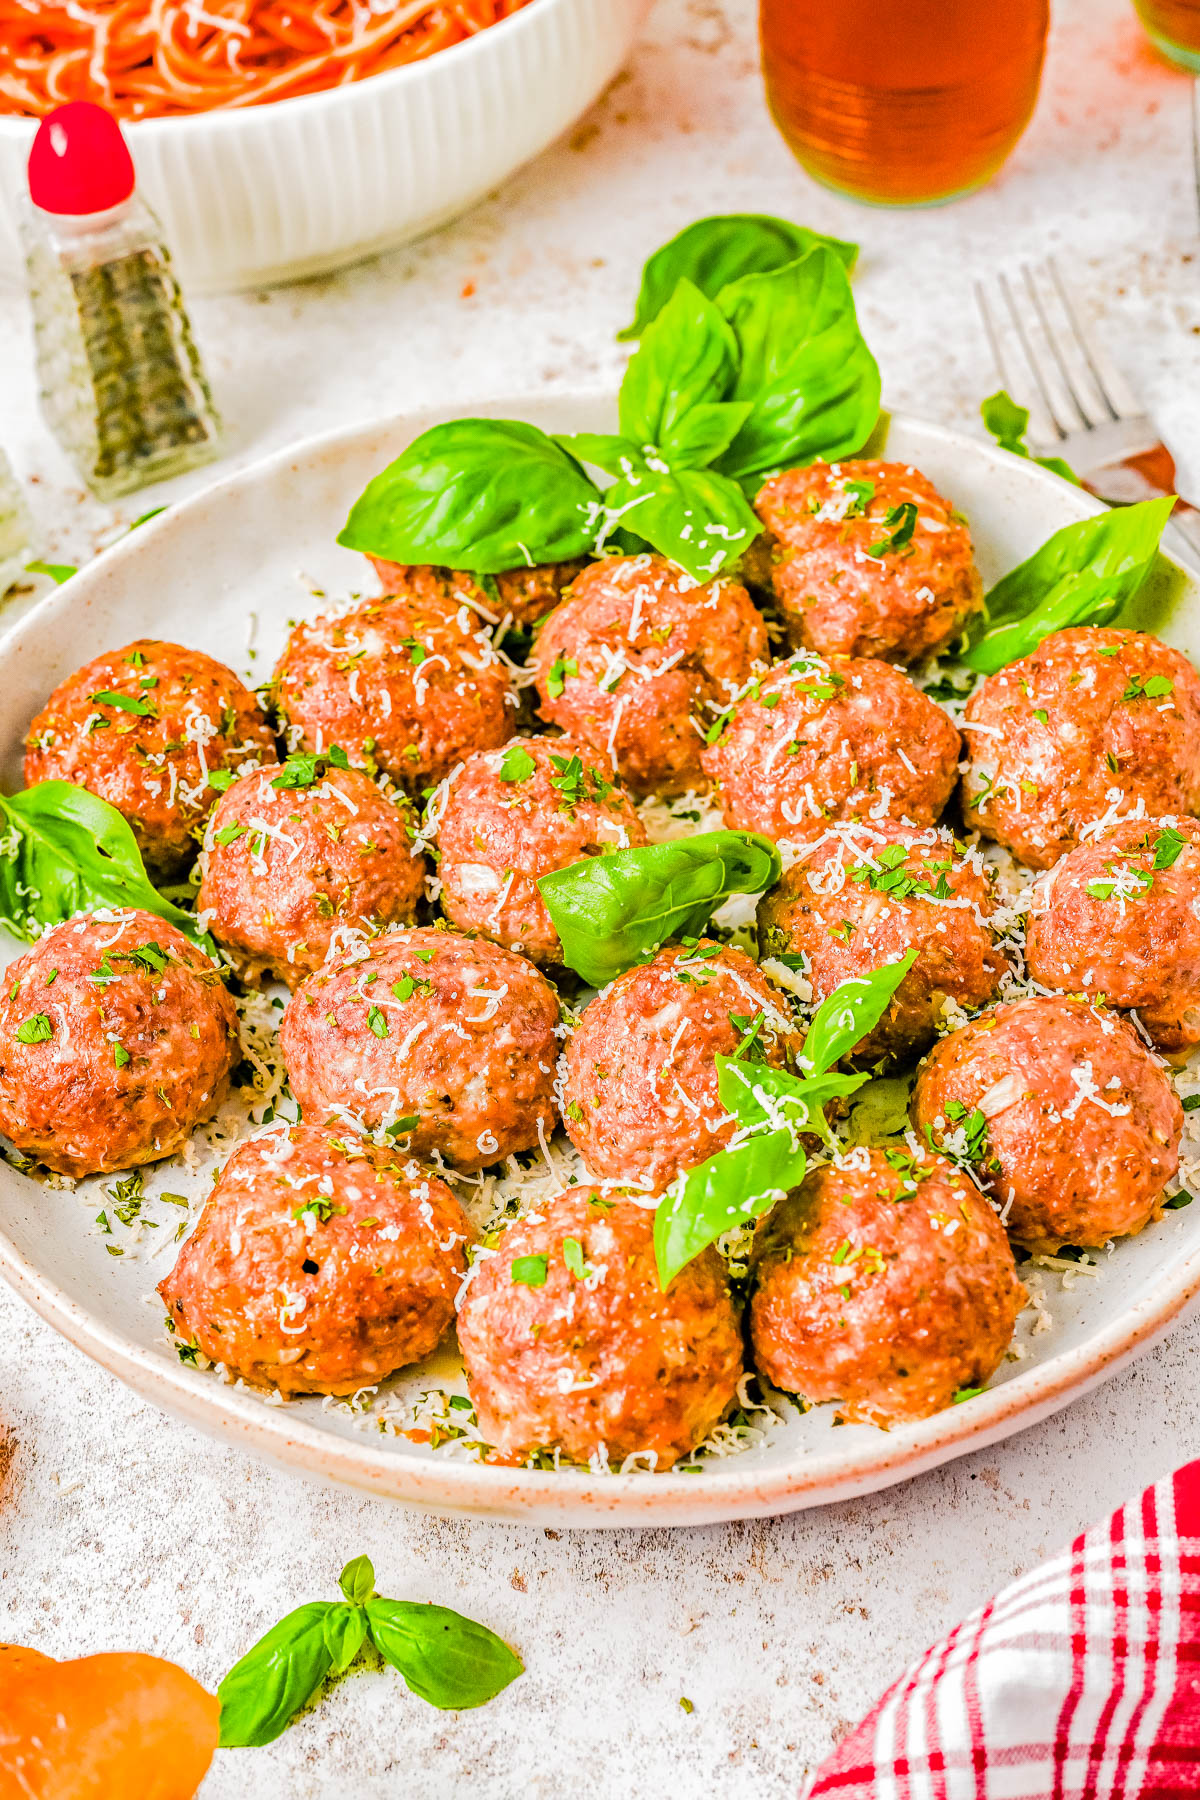 Baked Italian Meatballs — Ready in just 30 minutes, these quick and EASY baked meatballs come out perfectly moist and tender every time! There’s no need to brown the meatballs before baking, which cuts back on dishes and saves time! These are the BEST Italian meatballs for spaghetti, subs, casseroles, and more! 